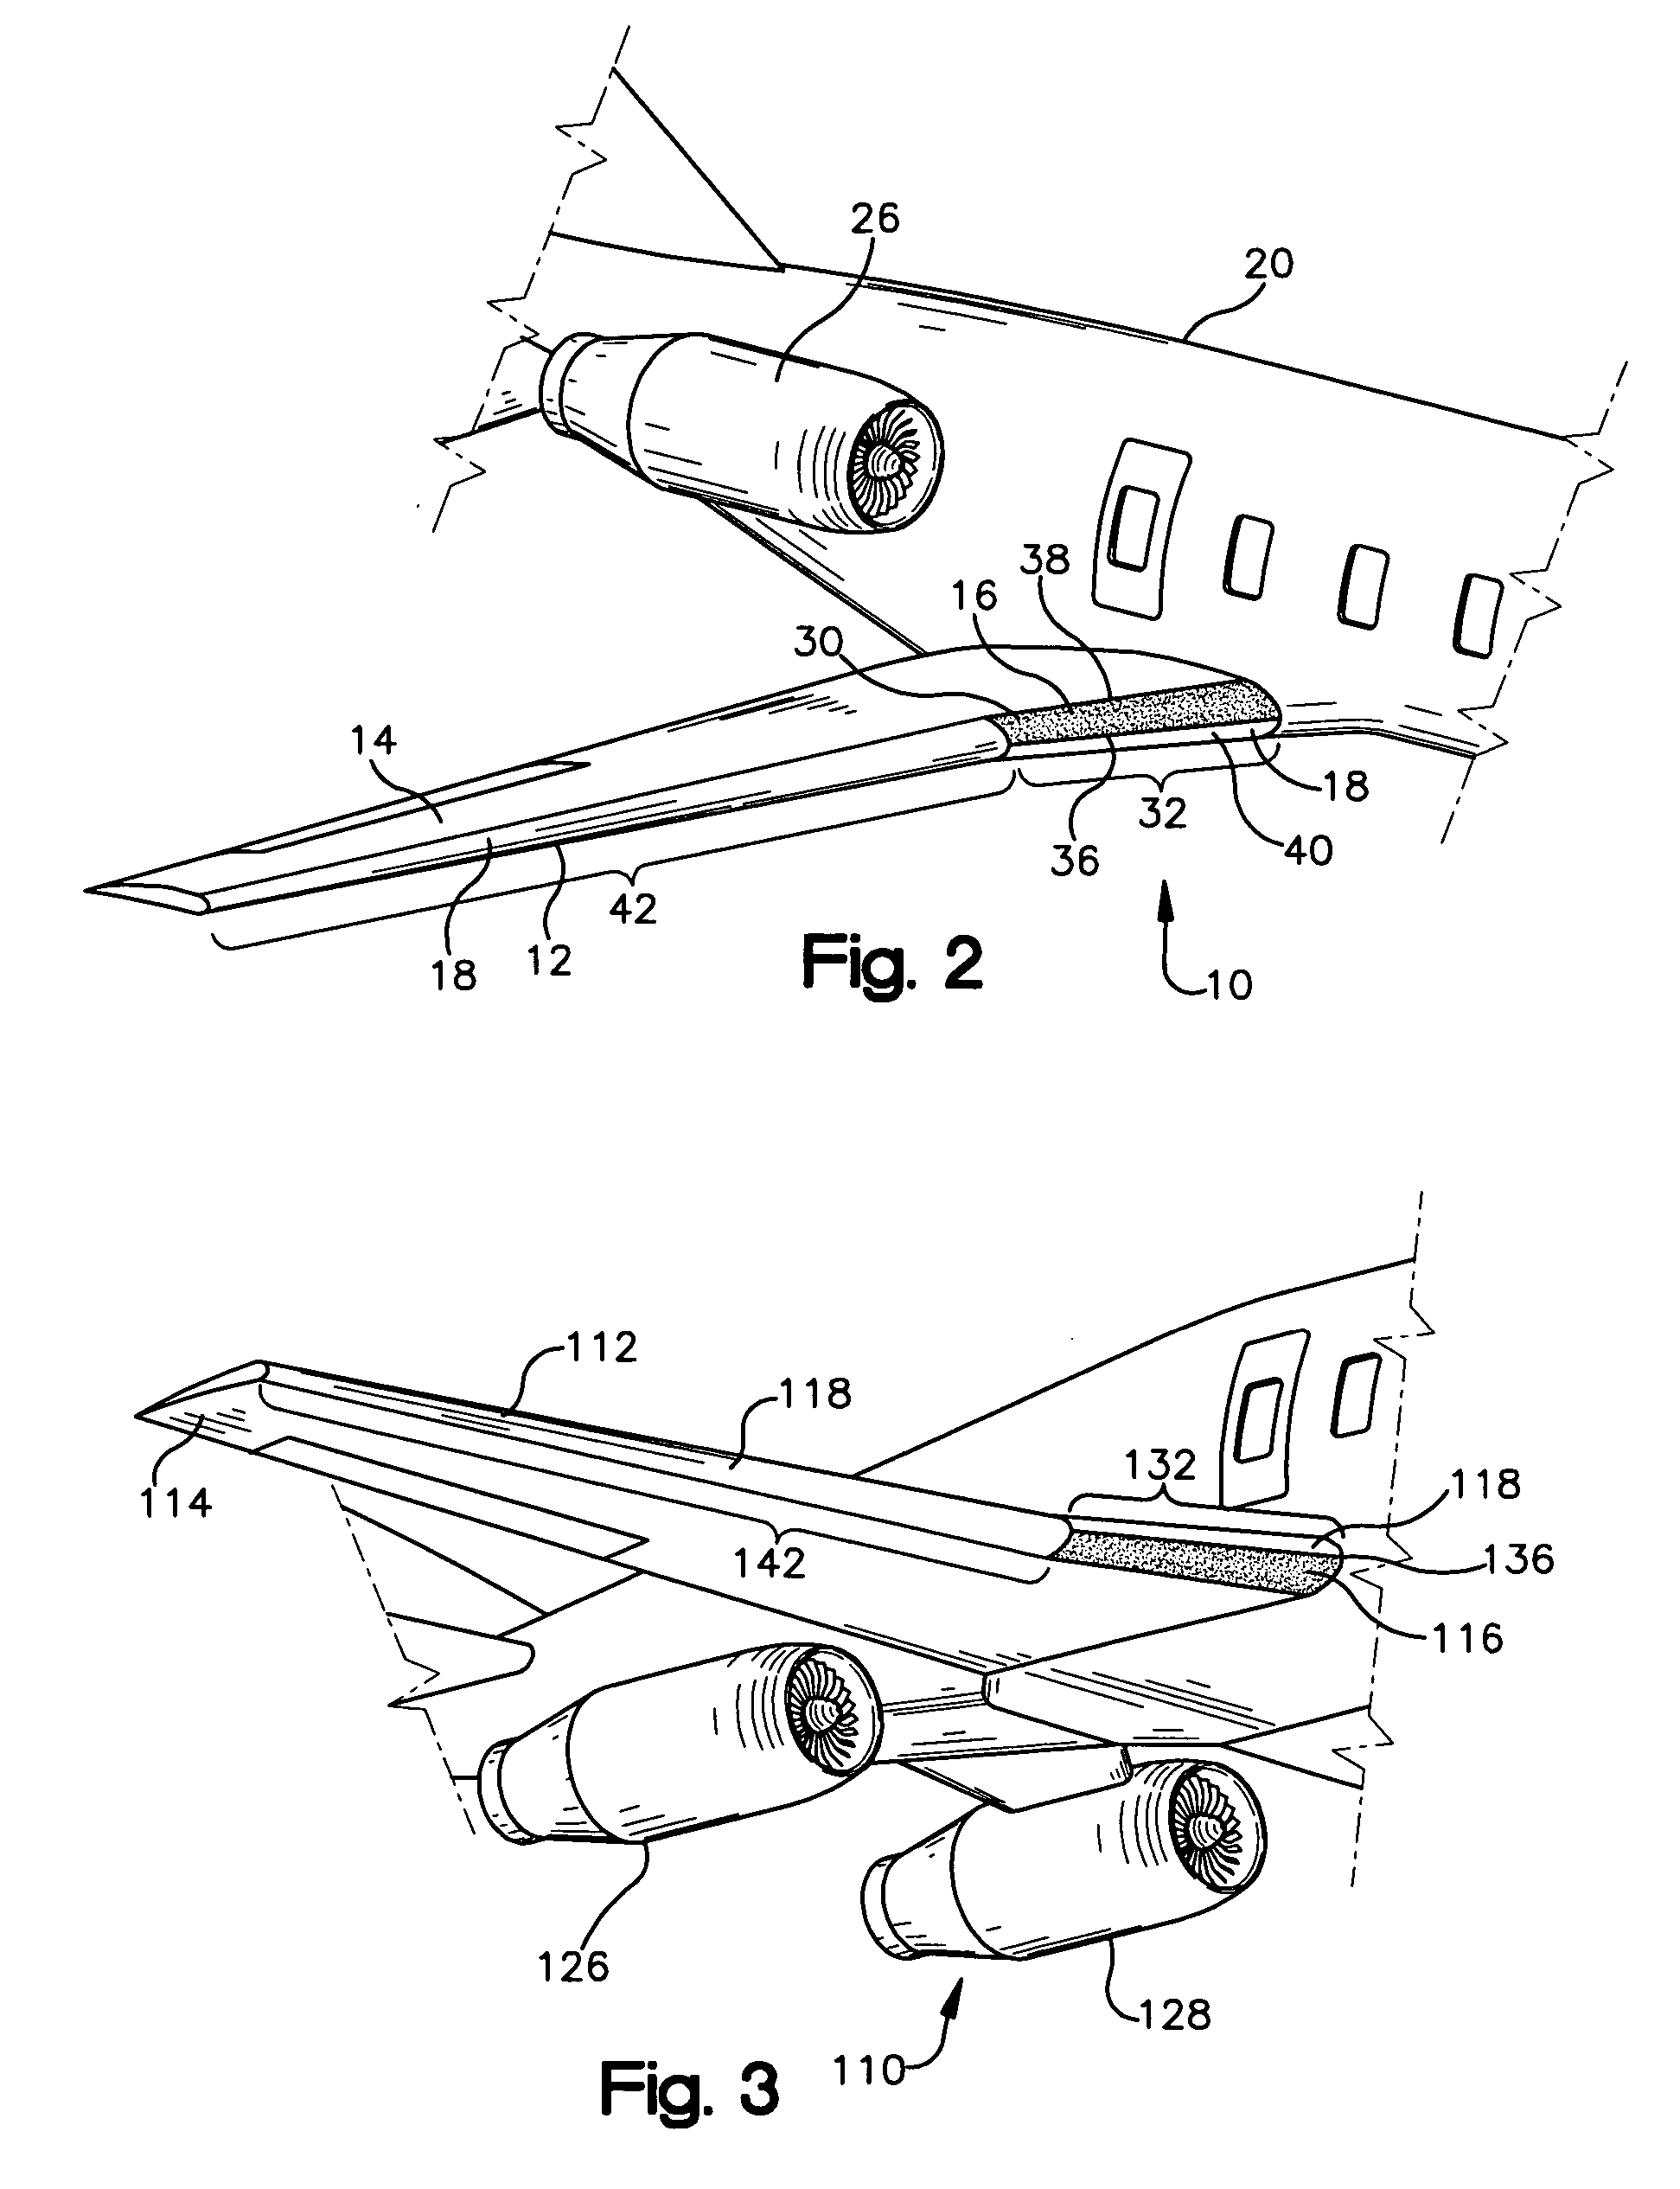 Ice protection system for aircraft